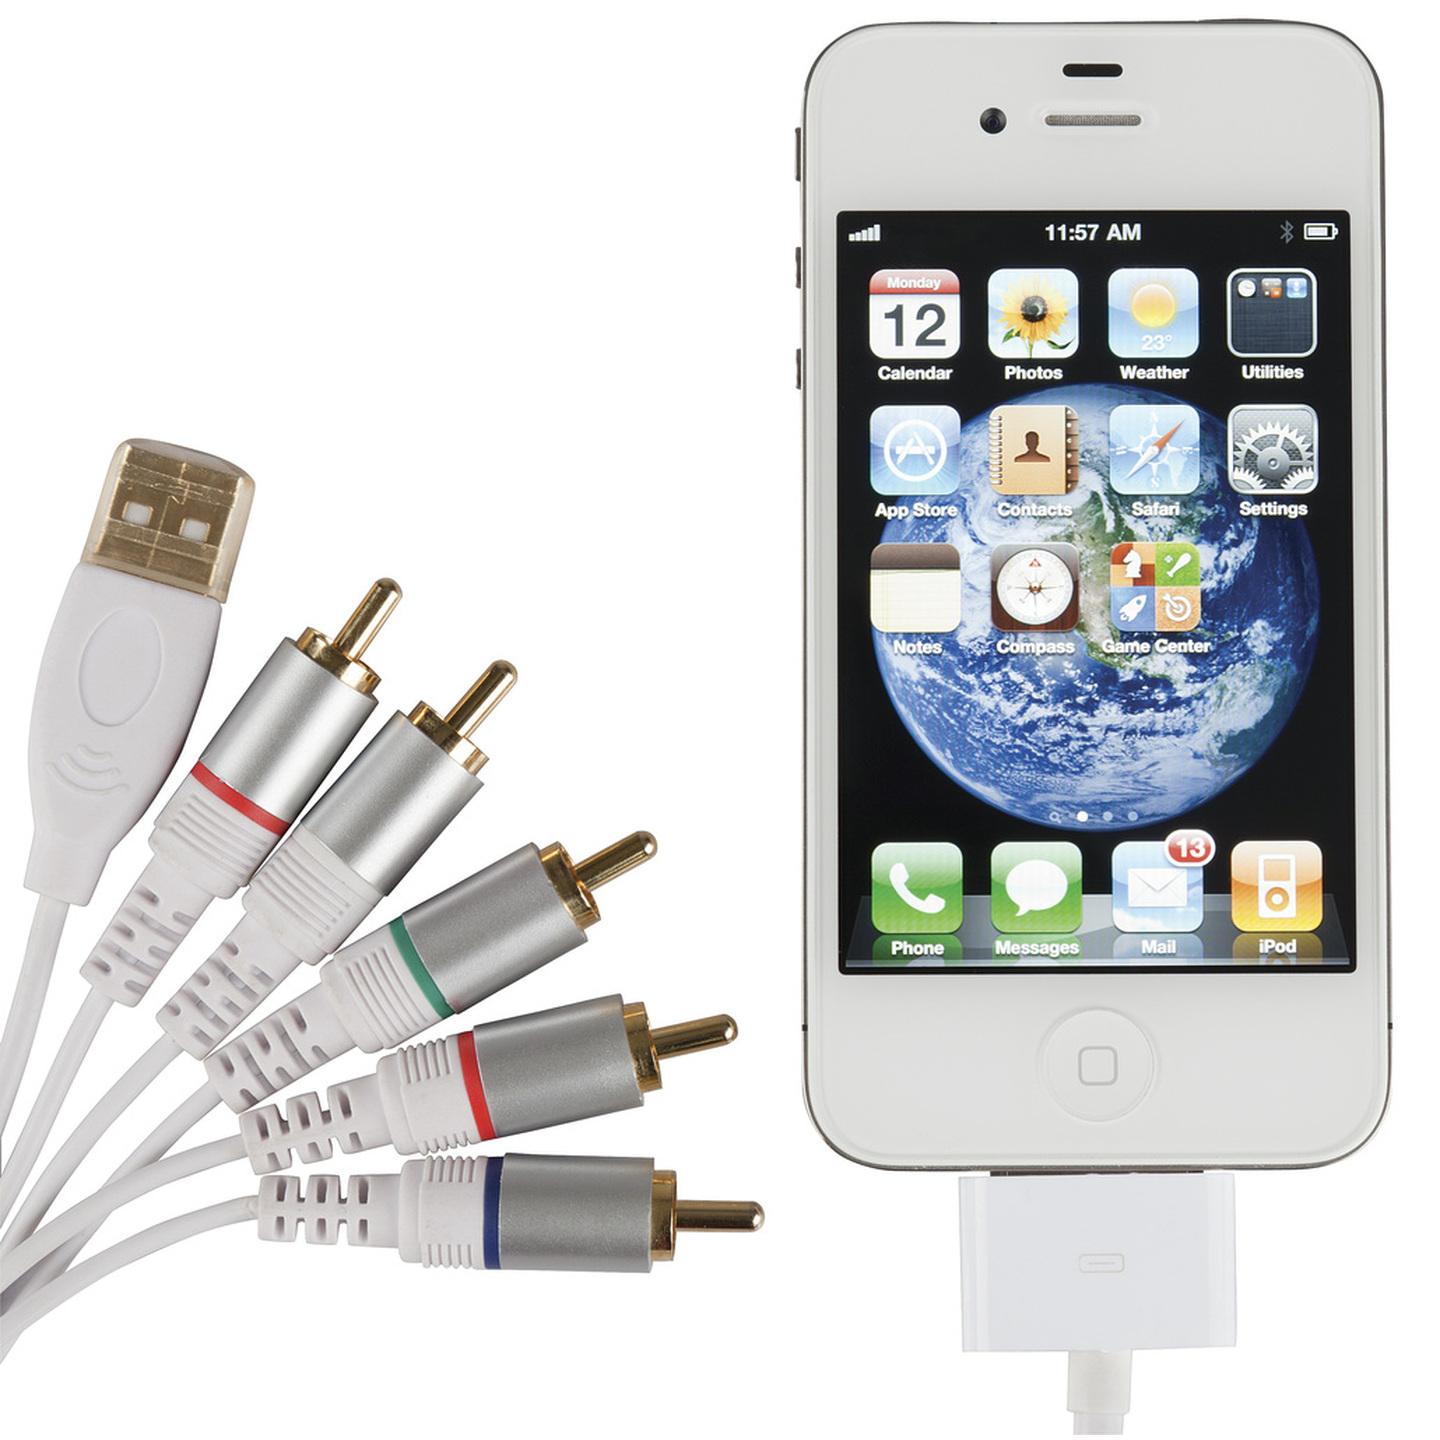 AV Component lead to suit iPod/iTouch/iPhone/iPad